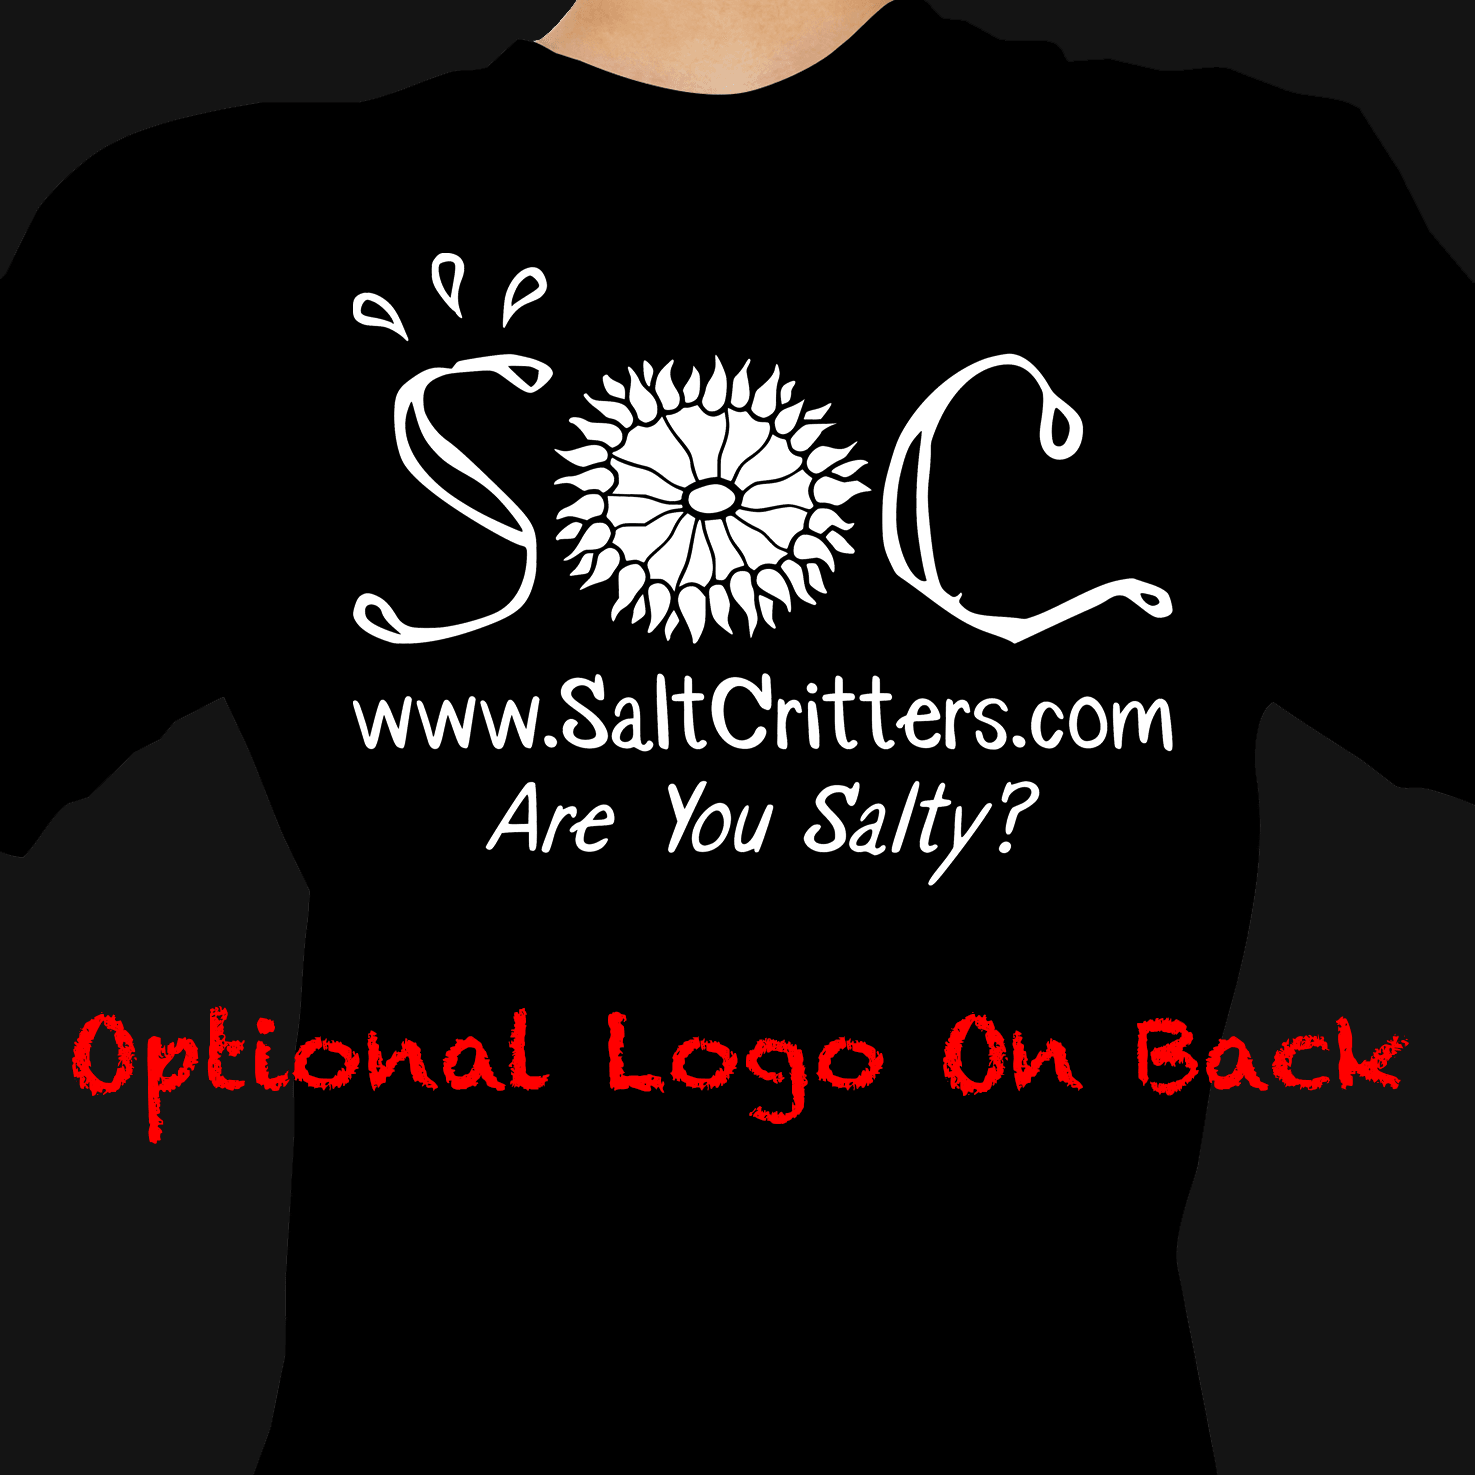 Sorry I Can't My Corals Need Me T-Shirt Black - SaltCritters